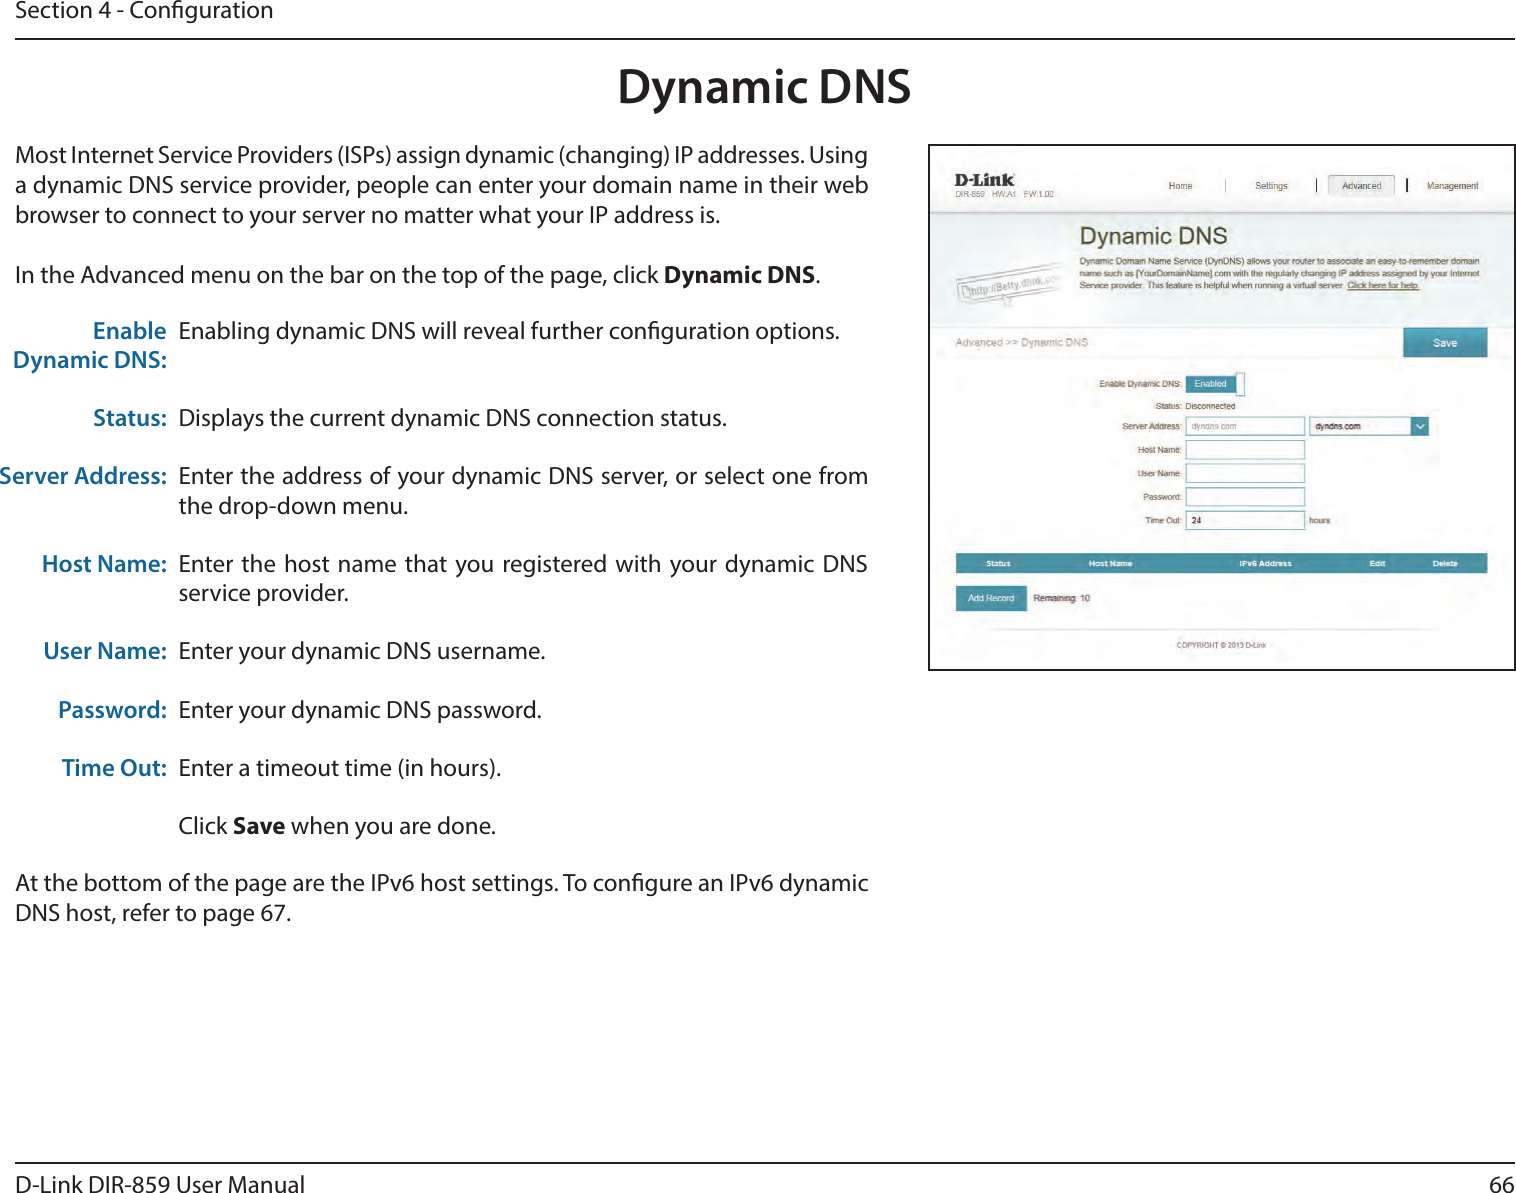 66D-Link DIR-859 User ManualSection 4 - CongurationDynamic DNSMost Internet Service Providers (ISPs) assign dynamic (changing) IP addresses. Using a dynamic DNS service provider, people can enter your domain name in their web browser to connect to your server no matter what your IP address is.In the Advanced menu on the bar on the top of the page, click Dynamic DNS.Enabling dynamic DNS will reveal further conguration options.Displays the current dynamic DNS connection status.Enter the address of your dynamic DNS server, or select one from the drop-down menu.Enter the host name that you registered with your dynamic DNS service provider.Enter your dynamic DNS username.Enter your dynamic DNS password.Enter a timeout time (in hours).Click Save when you are done.Enable Dynamic DNS:Status:Server Address:Host Name:User Name:Password:Time Out:At the bottom of the page are the IPv6 host settings. To congure an IPv6 dynamic DNS host, refer to page 67.